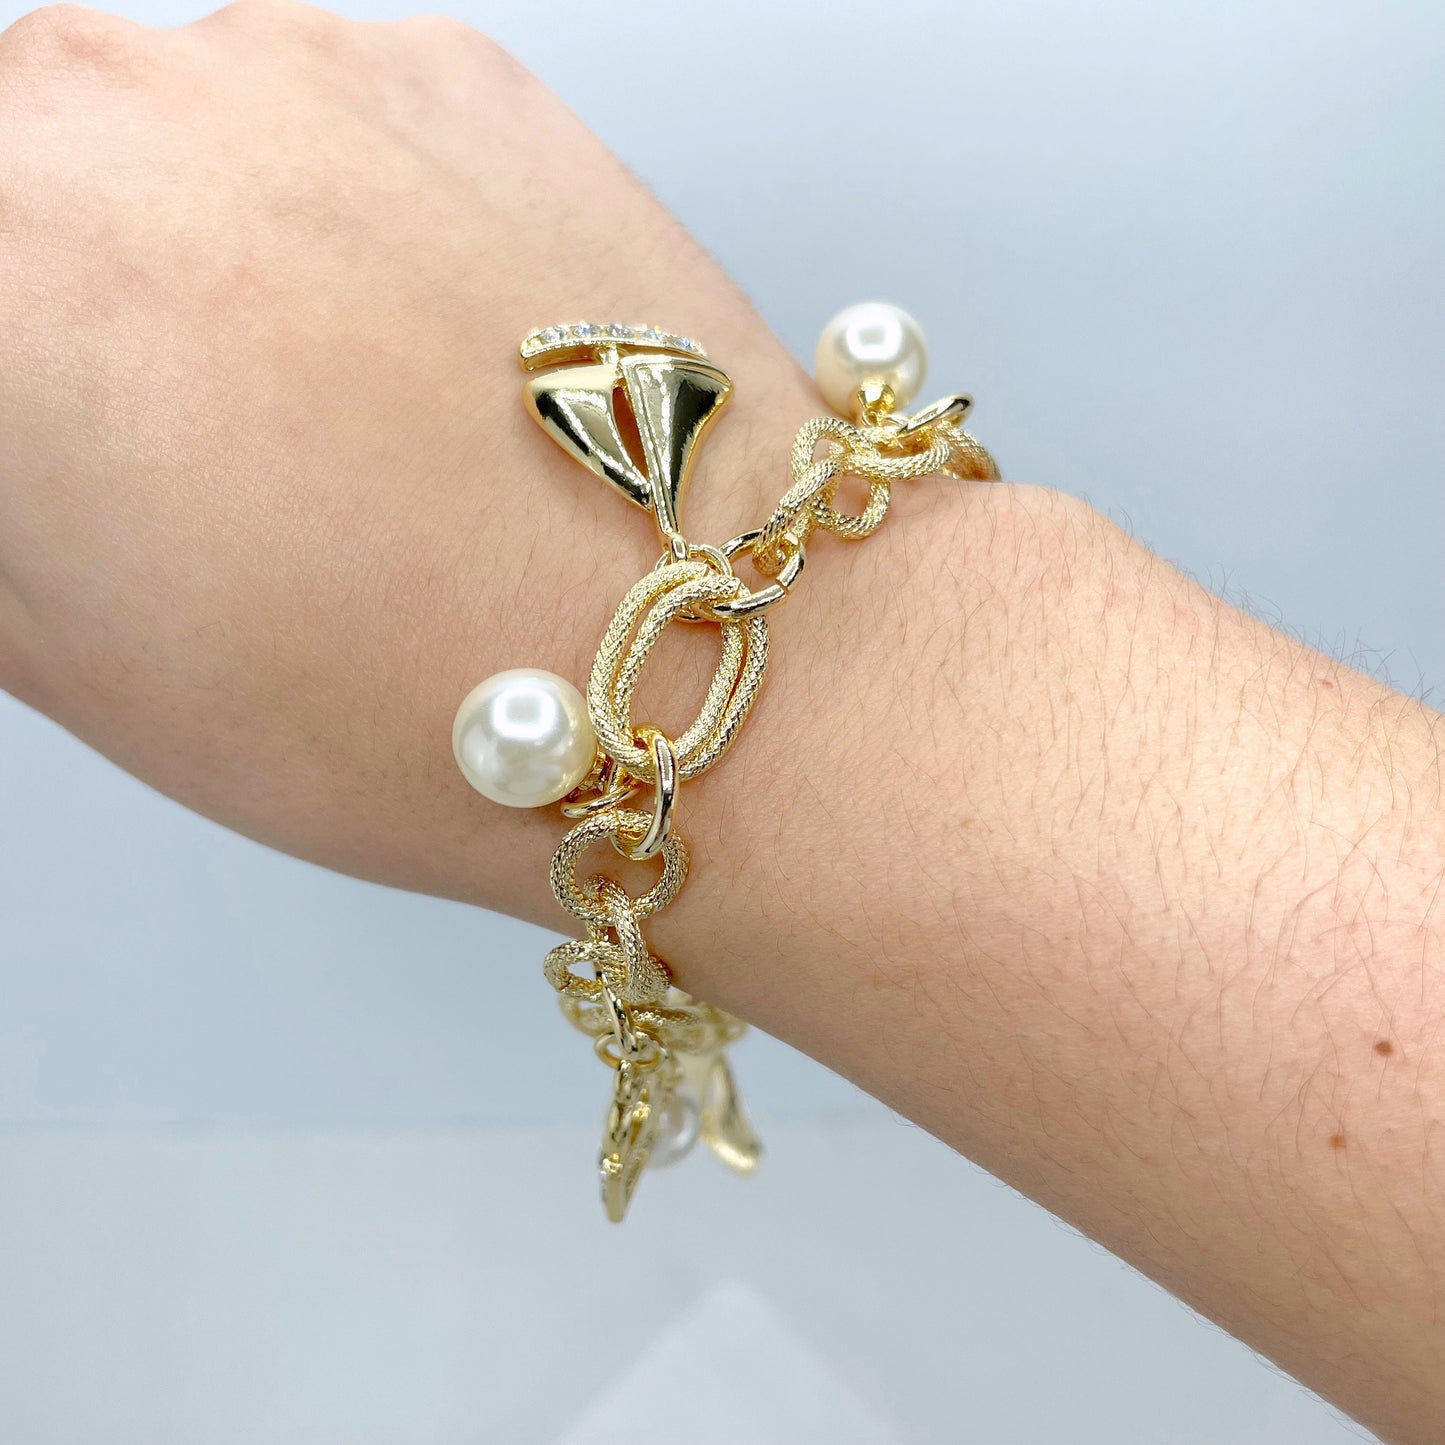 18k Gold Filled Cubic Zirconia Lock, Sail Boat and Simulated Pearls Charms in Texturized Link Bracelet, Wholesale Jewelry Making Supplies